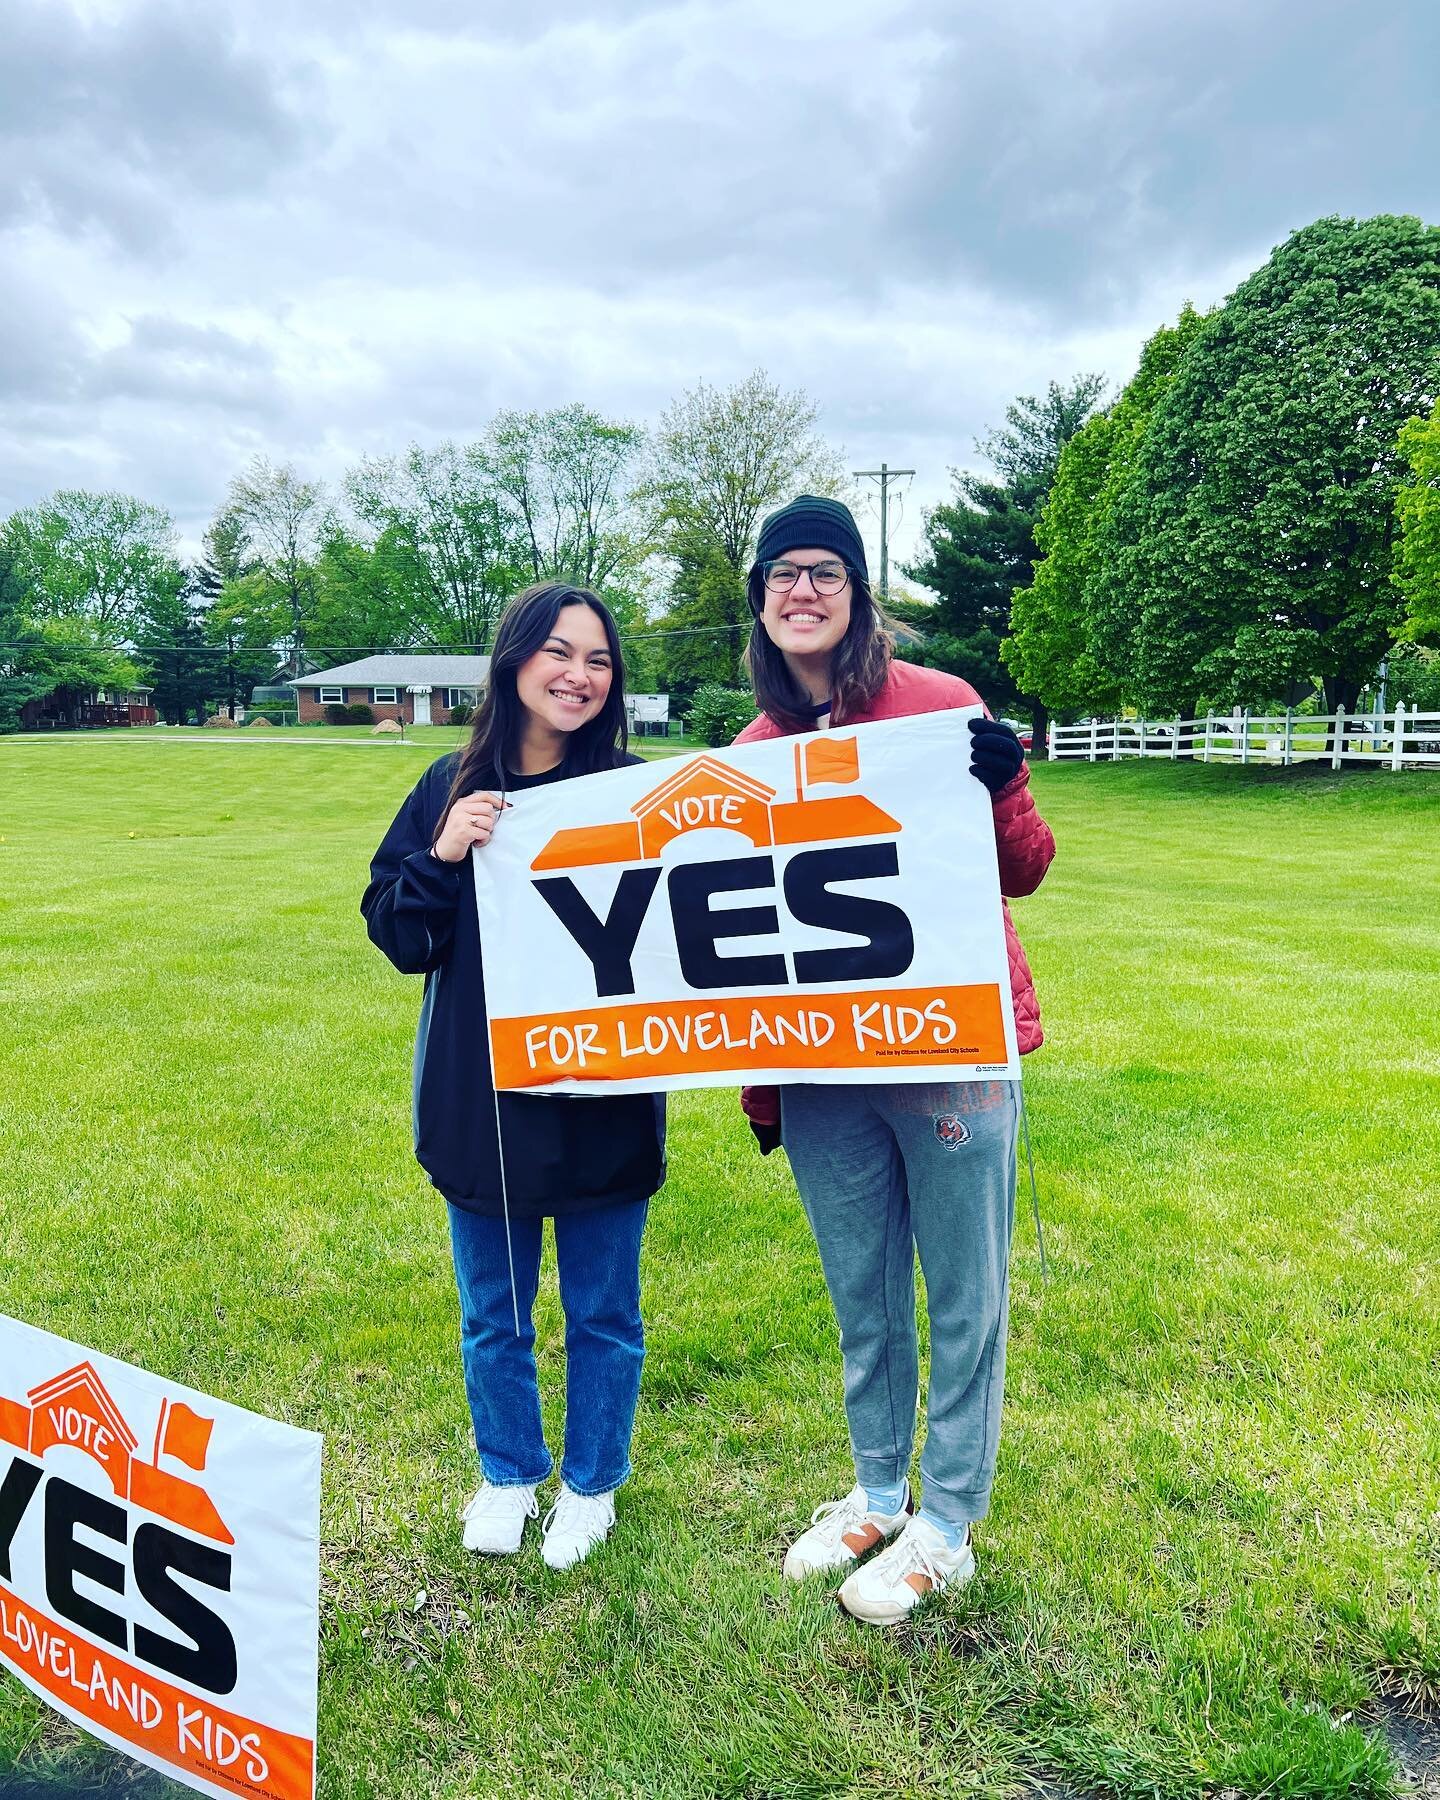 Thank you to everyone who has already voted YES...polls are open until 7:30! Just over 3 hours left to show your support for Loveland kids and community 🧡 Let's do this, Loveland!  #lovelandsupportsloveland #voteyes #beloveland